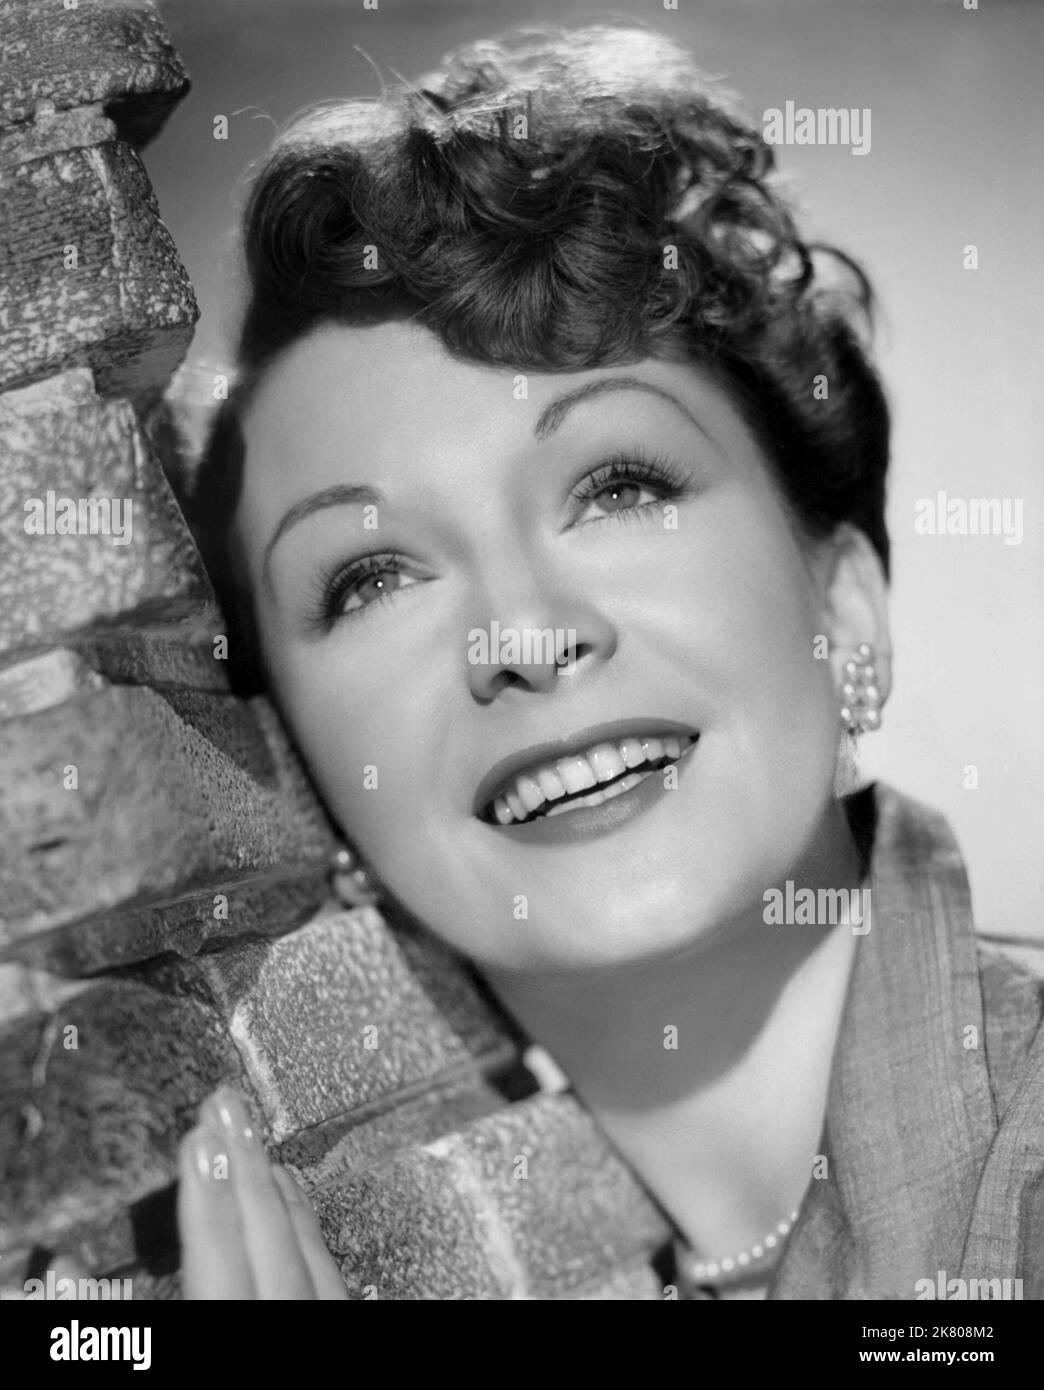 Millie harris Black and White Stock Photos & Images - Alamy